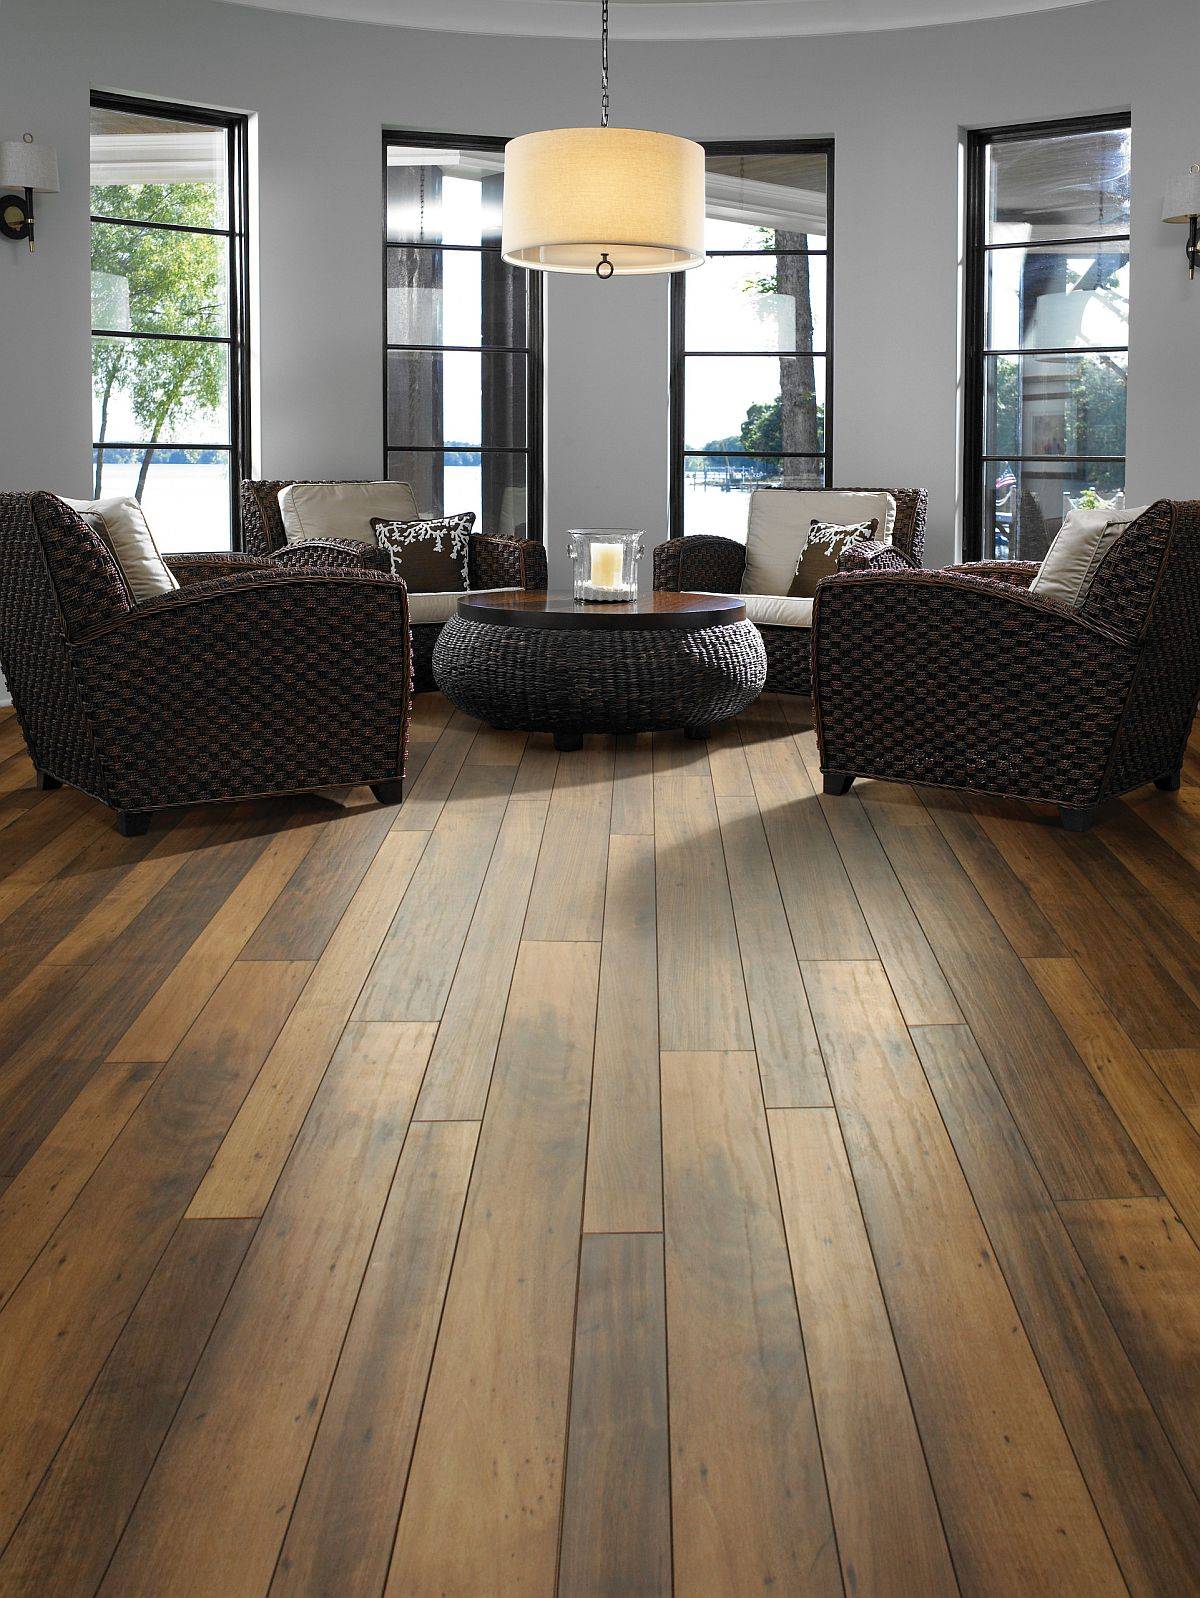 Open-plan-living-space-of-Florida-home-with-laminate-wood-flooring-11854